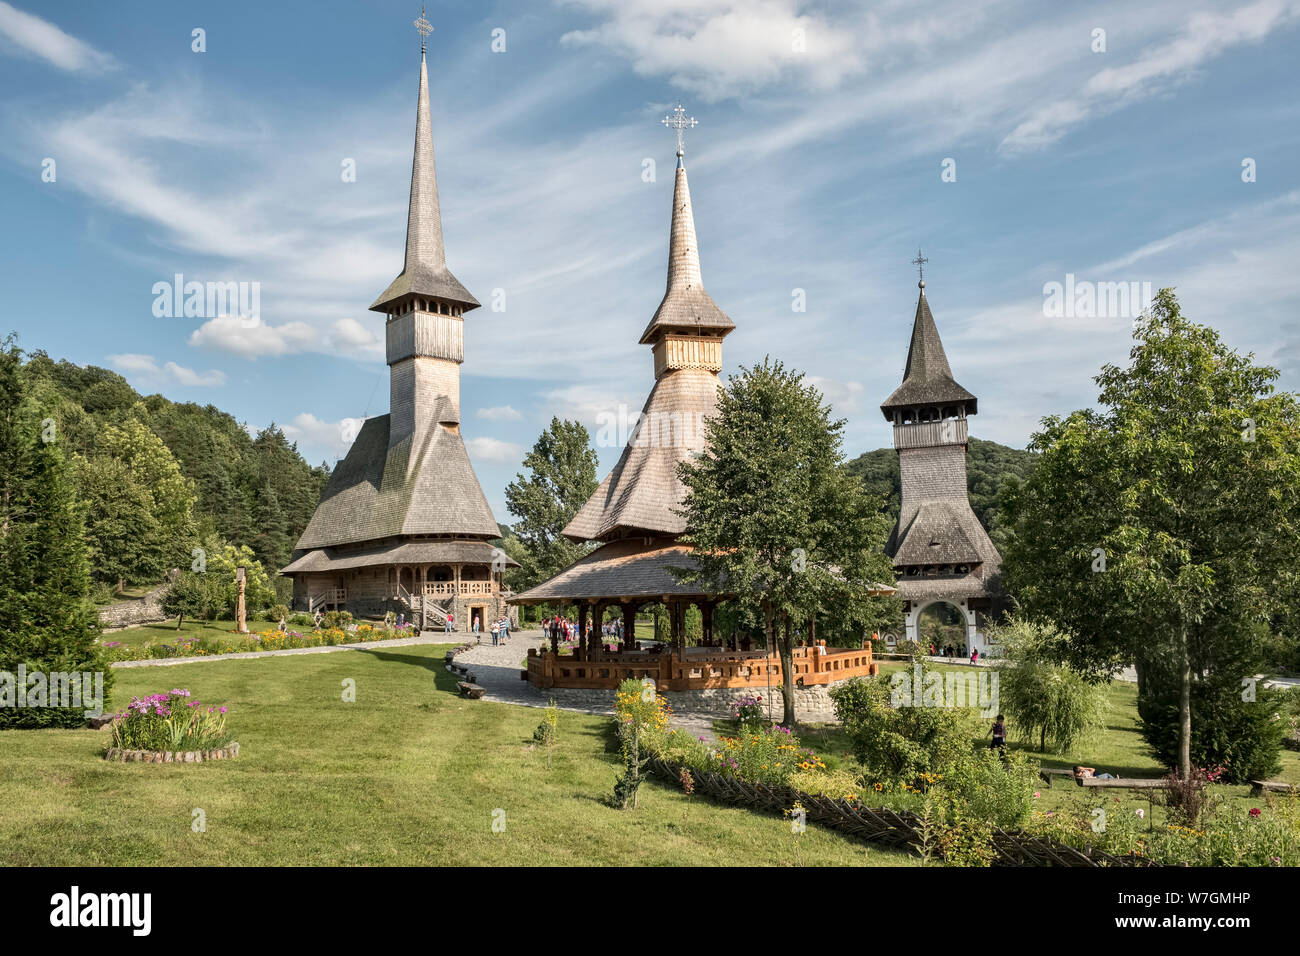 Bârsana Monastery, Maramureș, northern Romania. It was built in 1993 by local craftsmen using traditional woodworking techniques Stock Photo